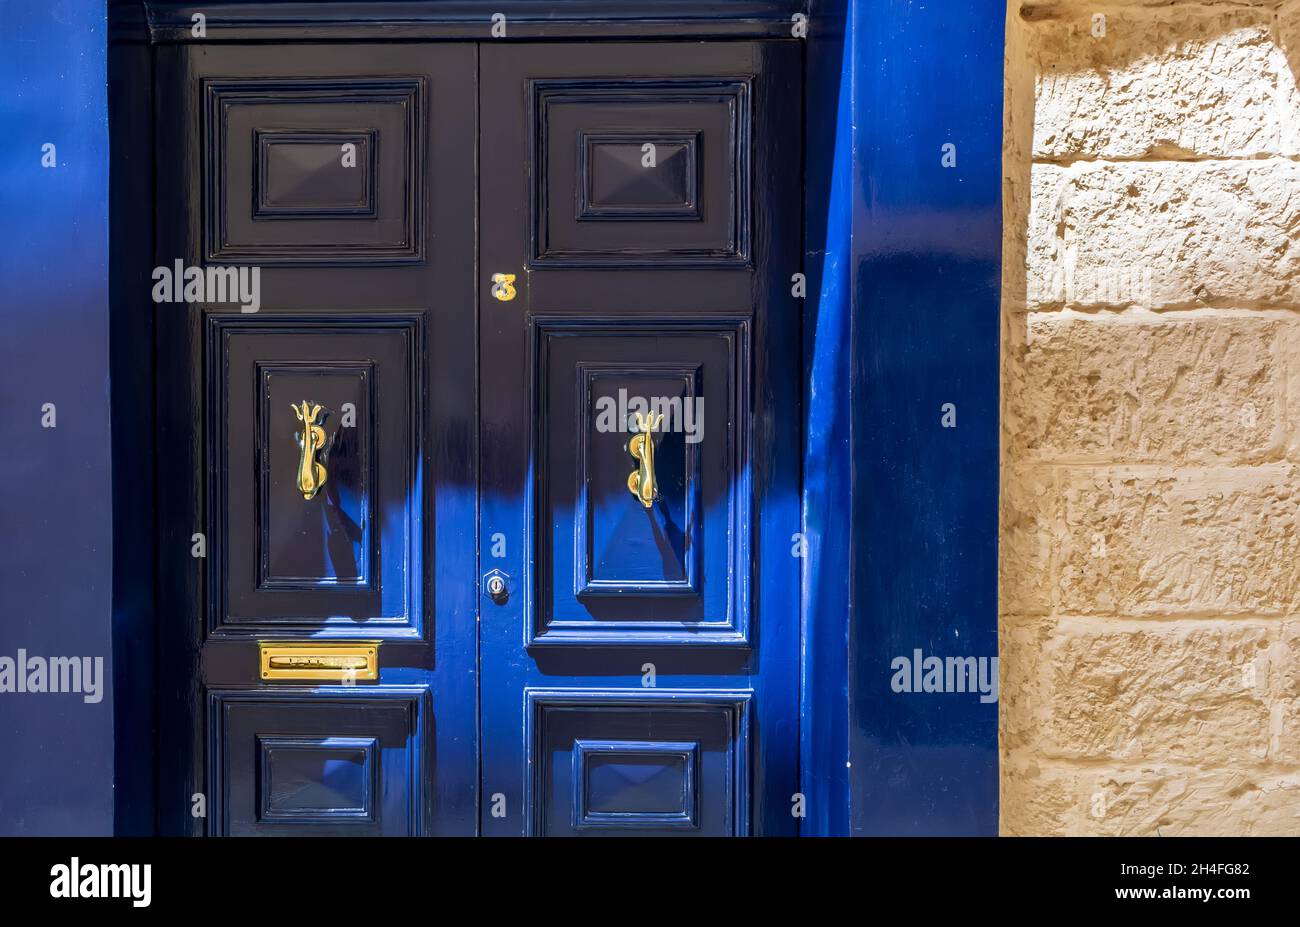 Blue wooden door with golden vintage knockers as dolphin with a trident-shaped tails and golden decorative mail slot Stock Photo